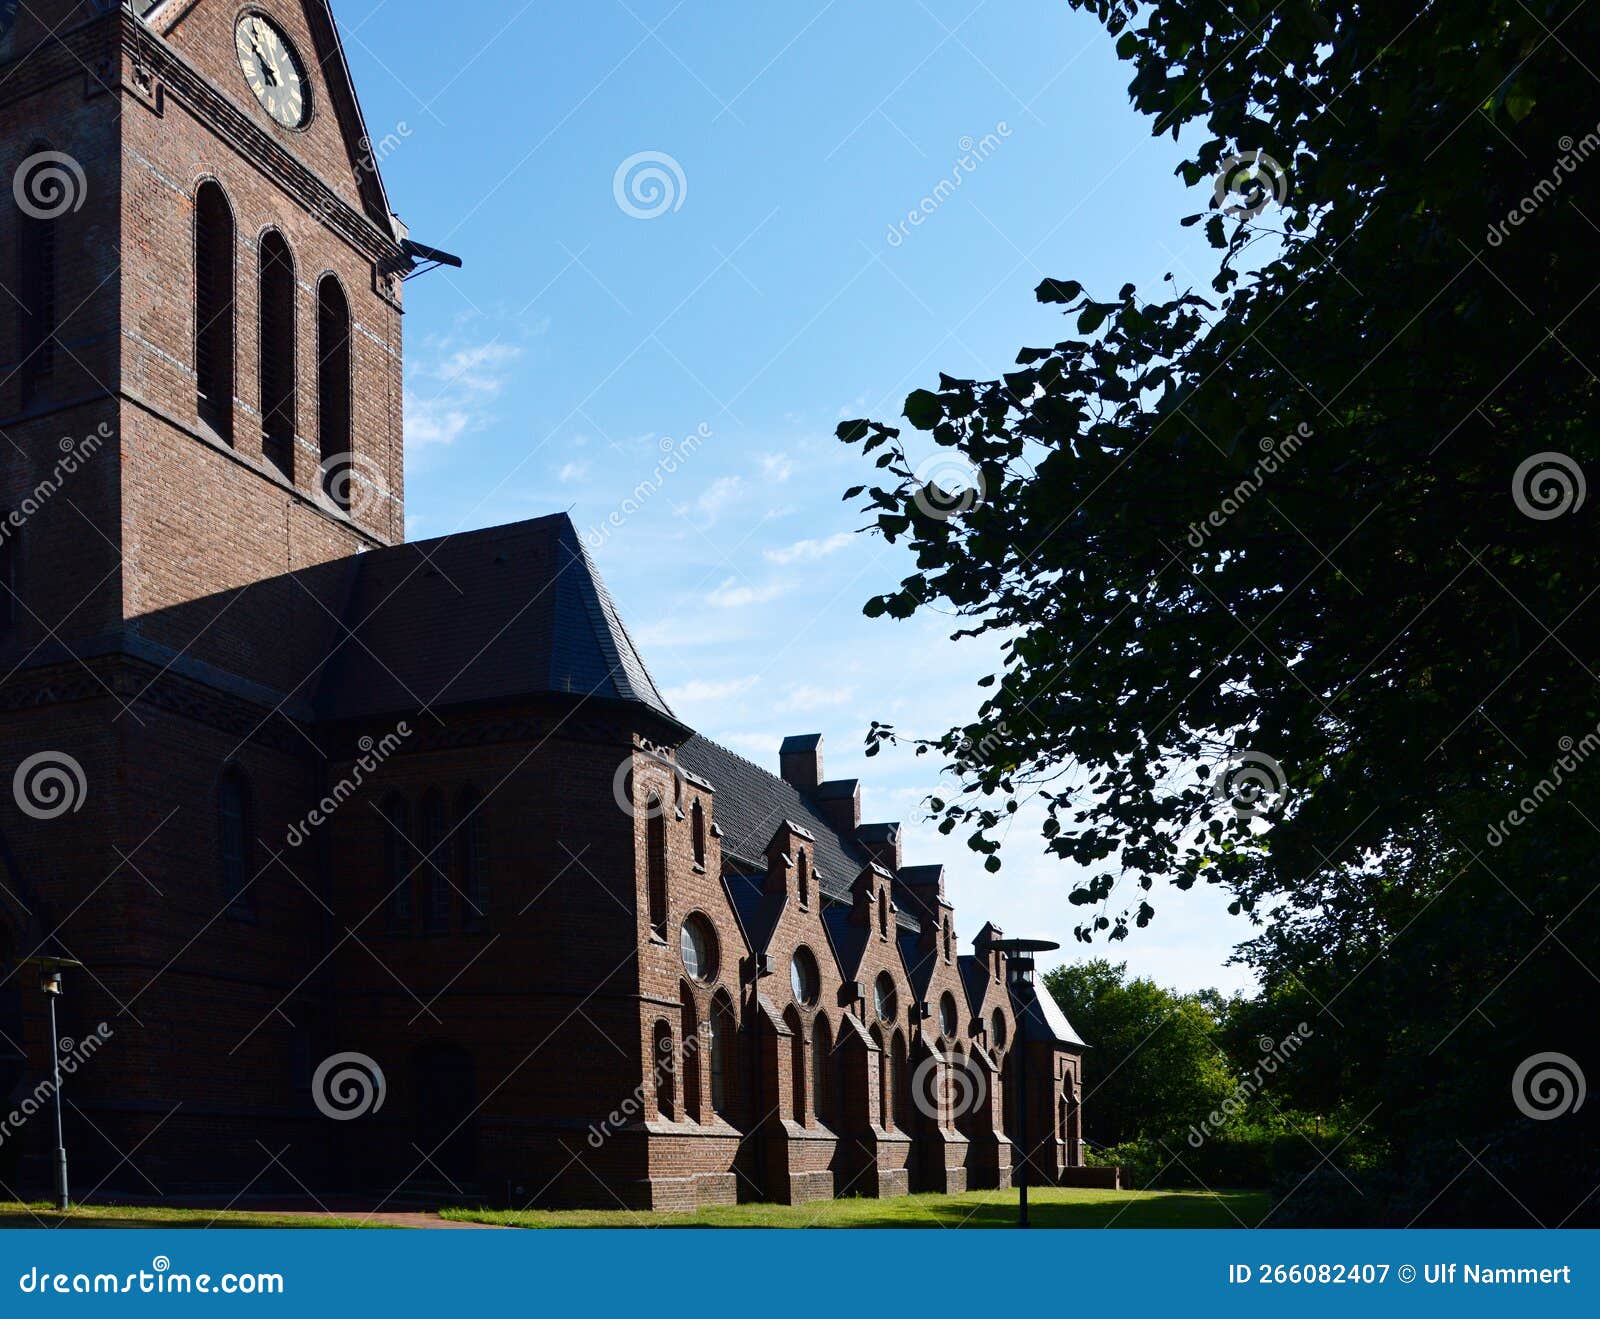 historical peace church in the town loga, leer, east frisia, lower saxony